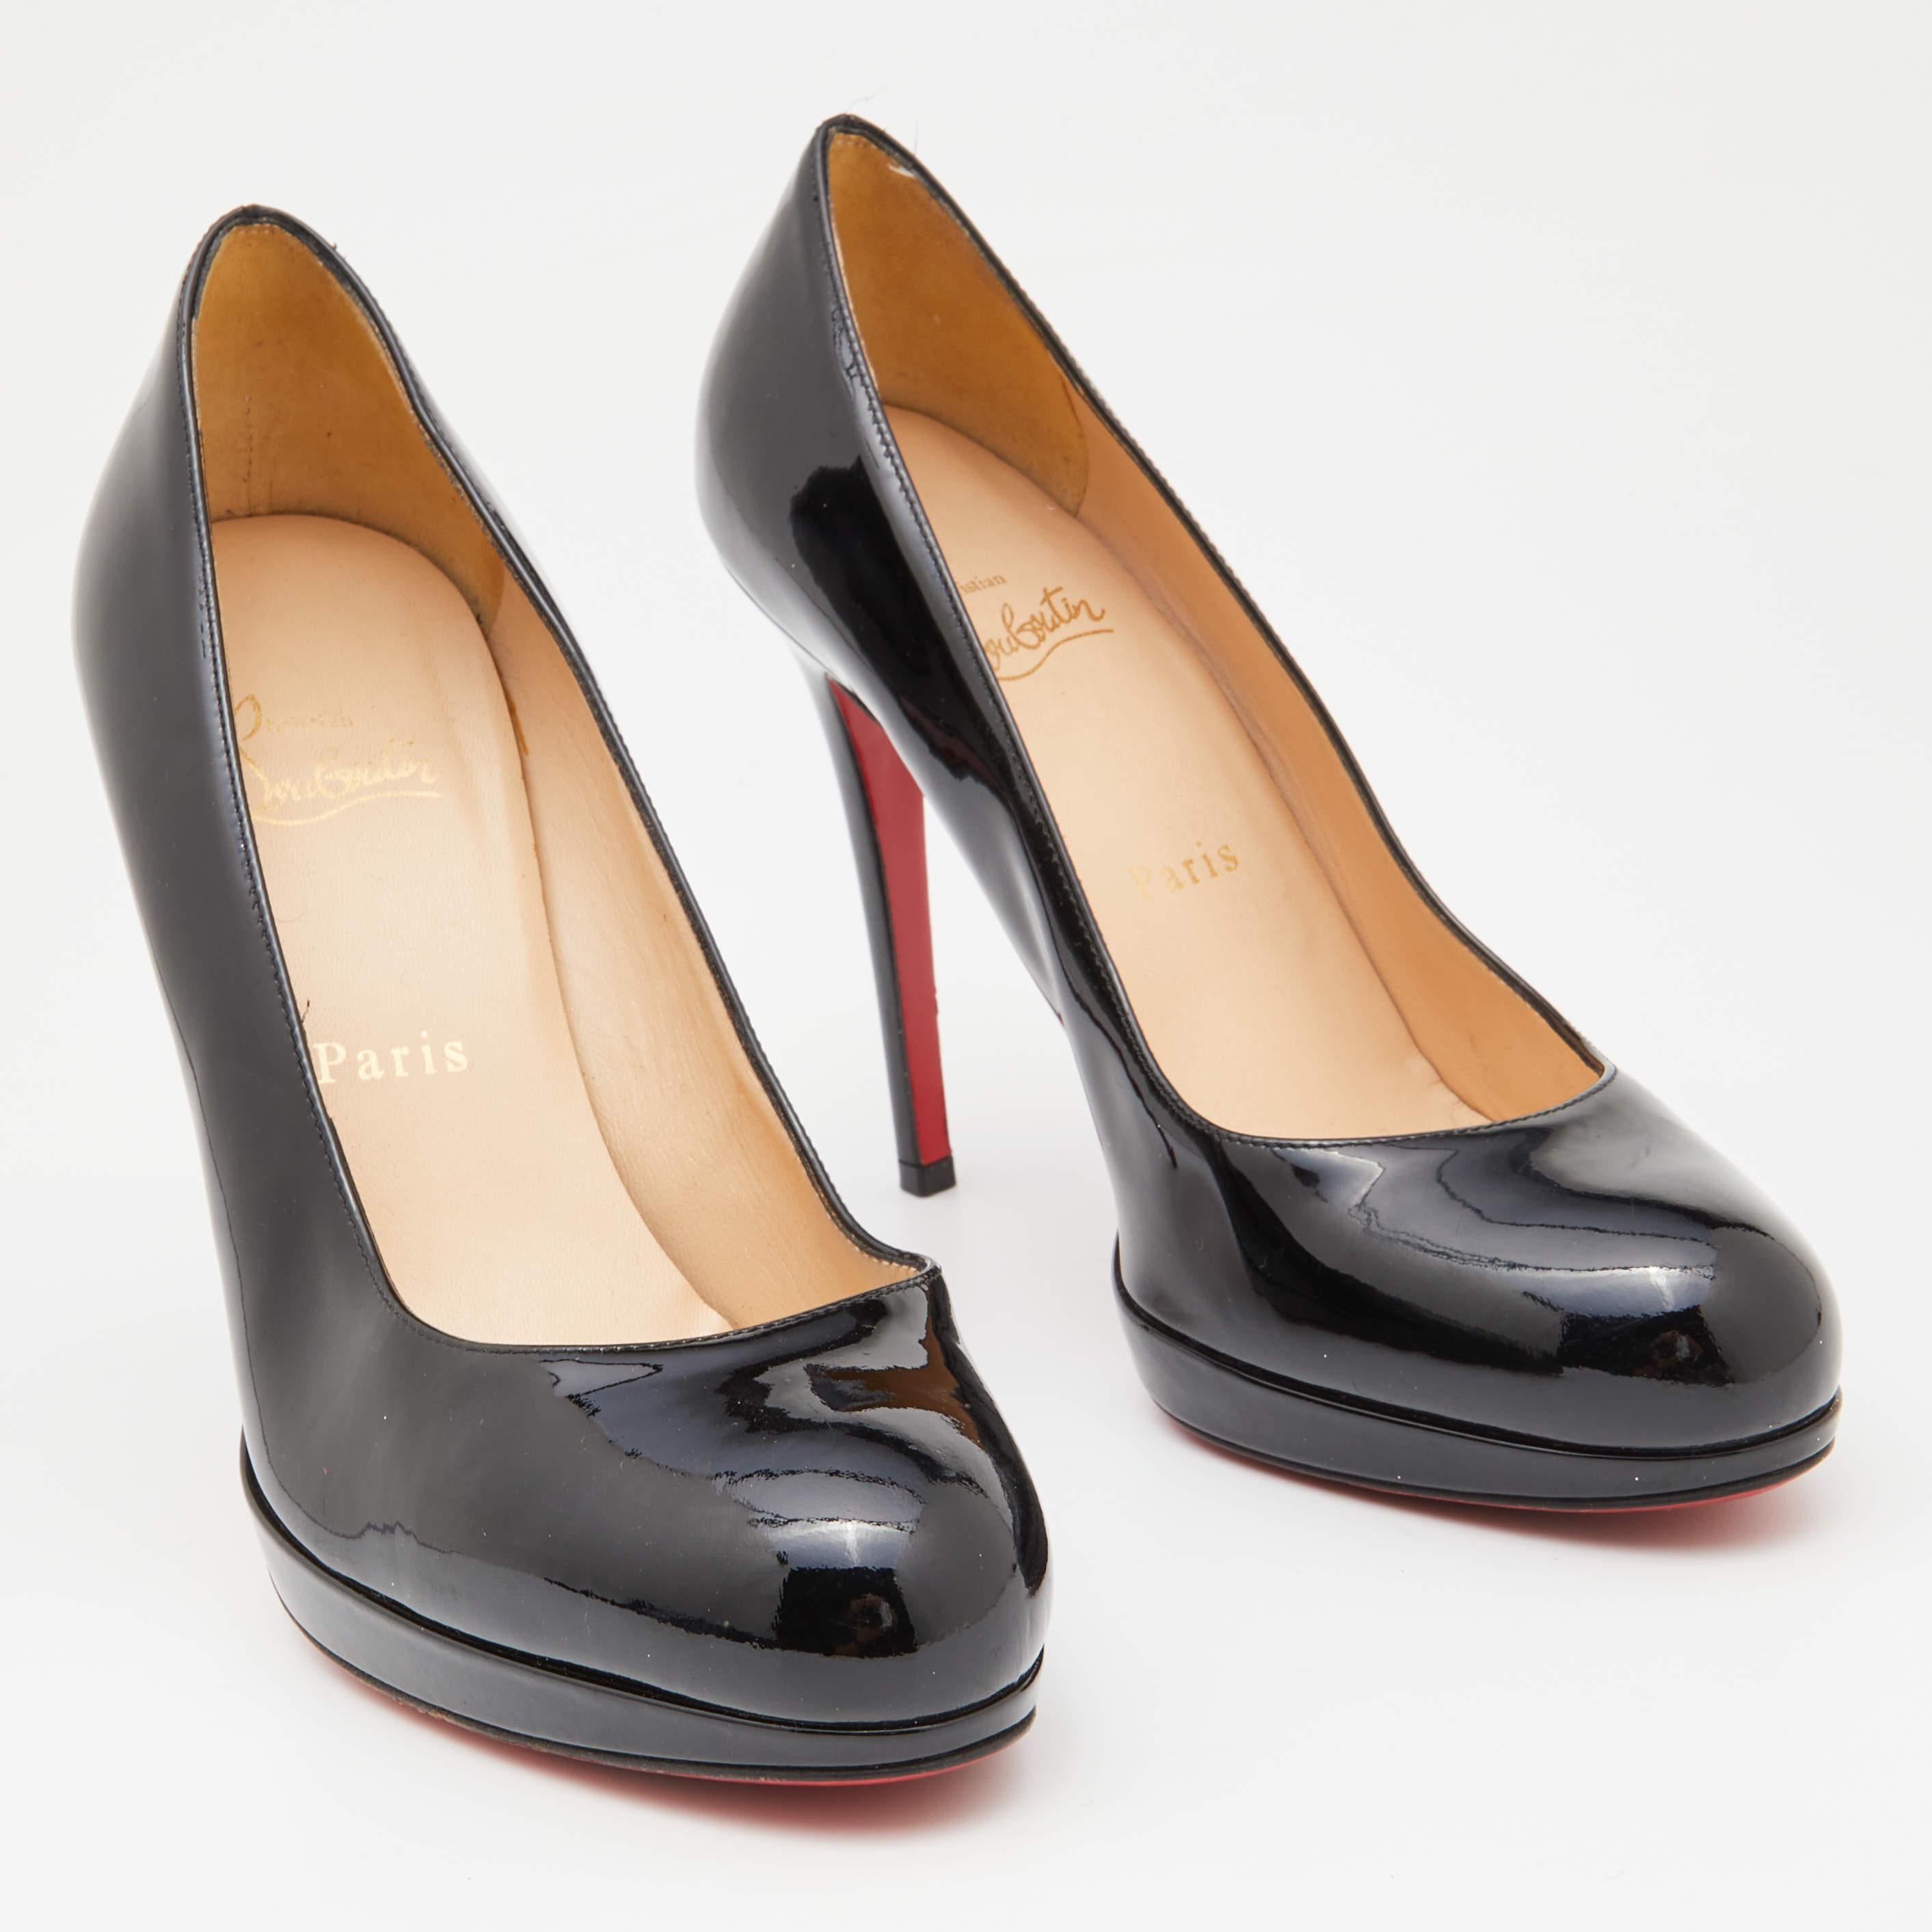 Exhibit an elegant style with this pair of pumps. These branded shoes for women are crafted from quality materials. They are set on durable soles and sleek heels.

